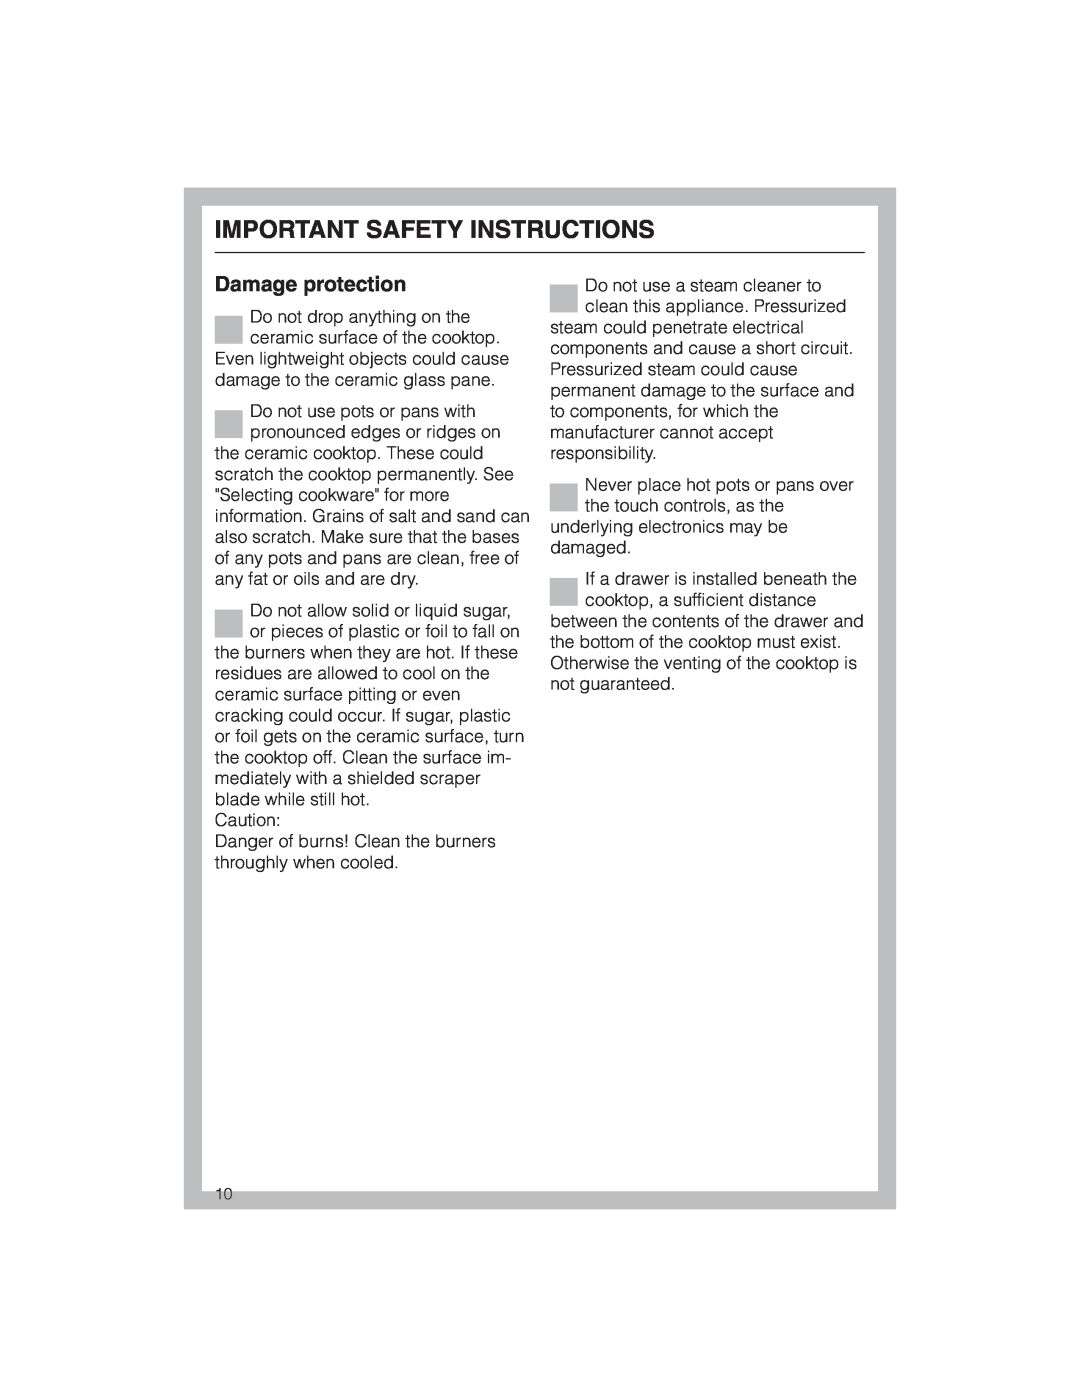 Miele KM 5773 installation instructions Damage protection, Important Safety Instructions 